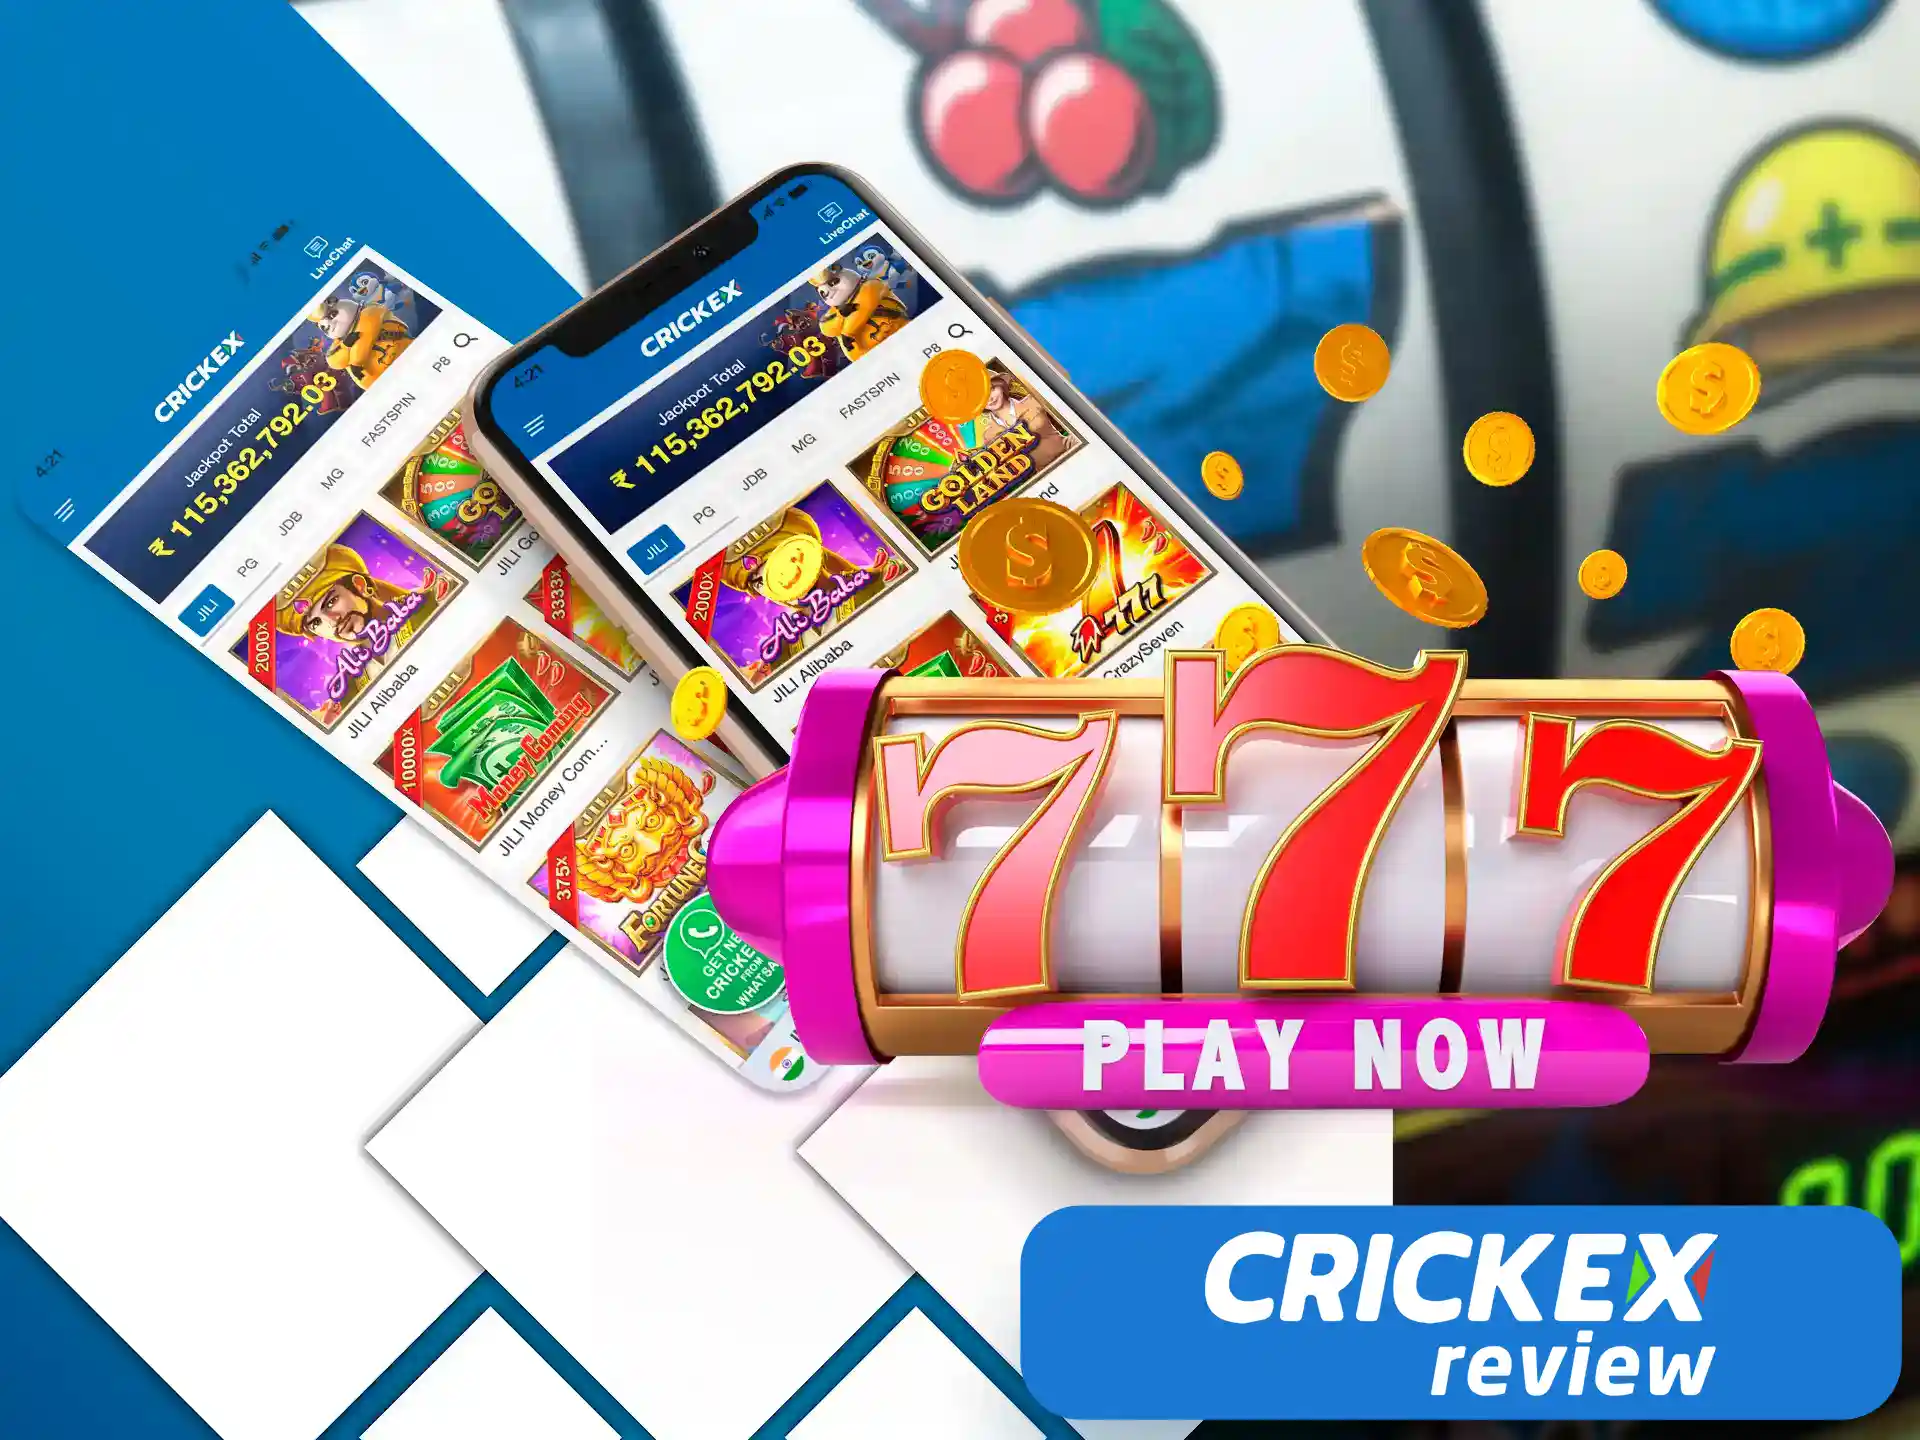 Users from Bangladesh have a unique opportunity to play slot machines directly from their smartphone on the Crickex app.